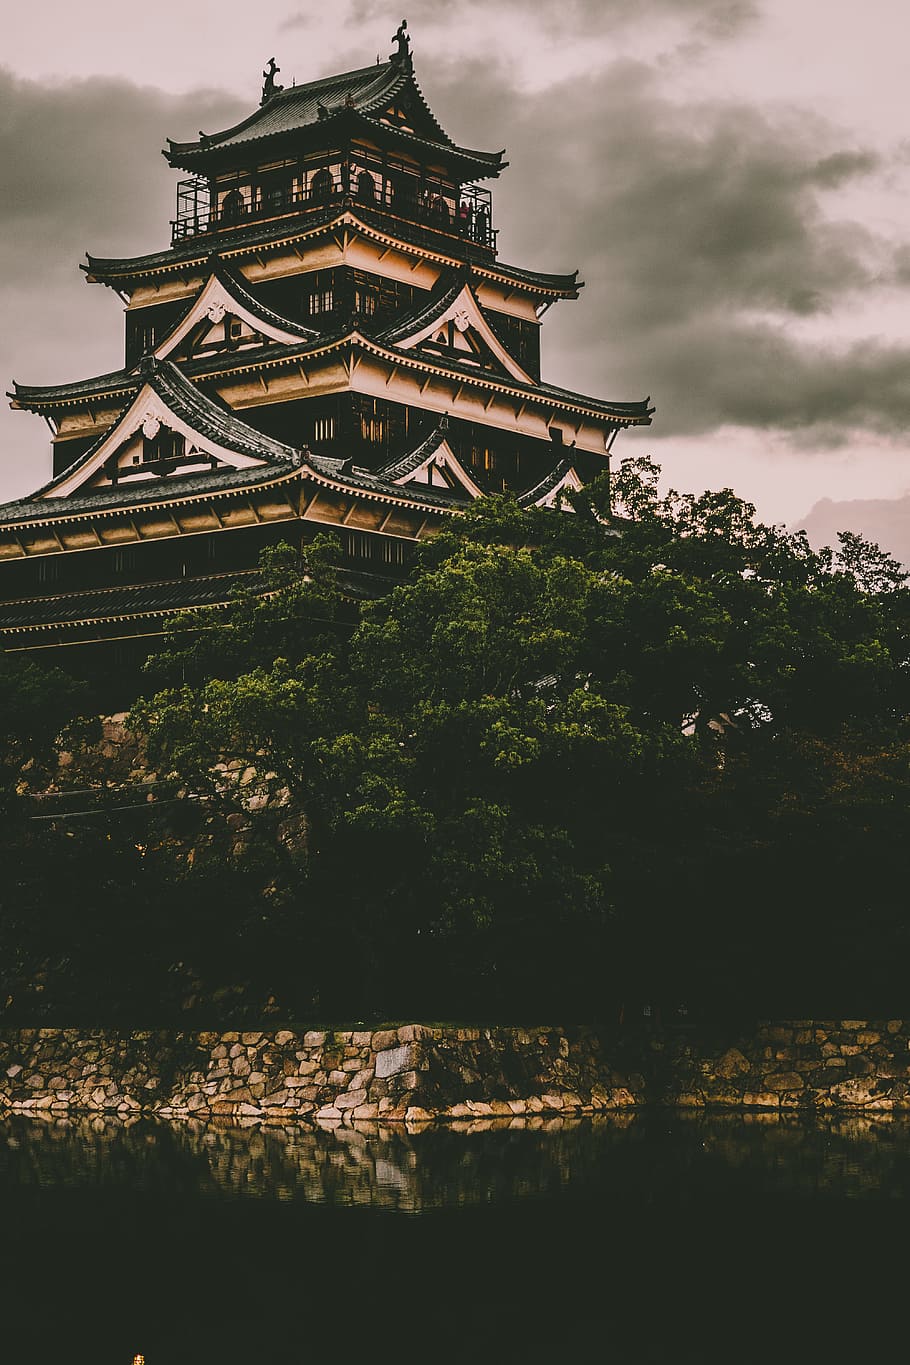 beige and black concrete castle, brown and black temple under cloudy sky